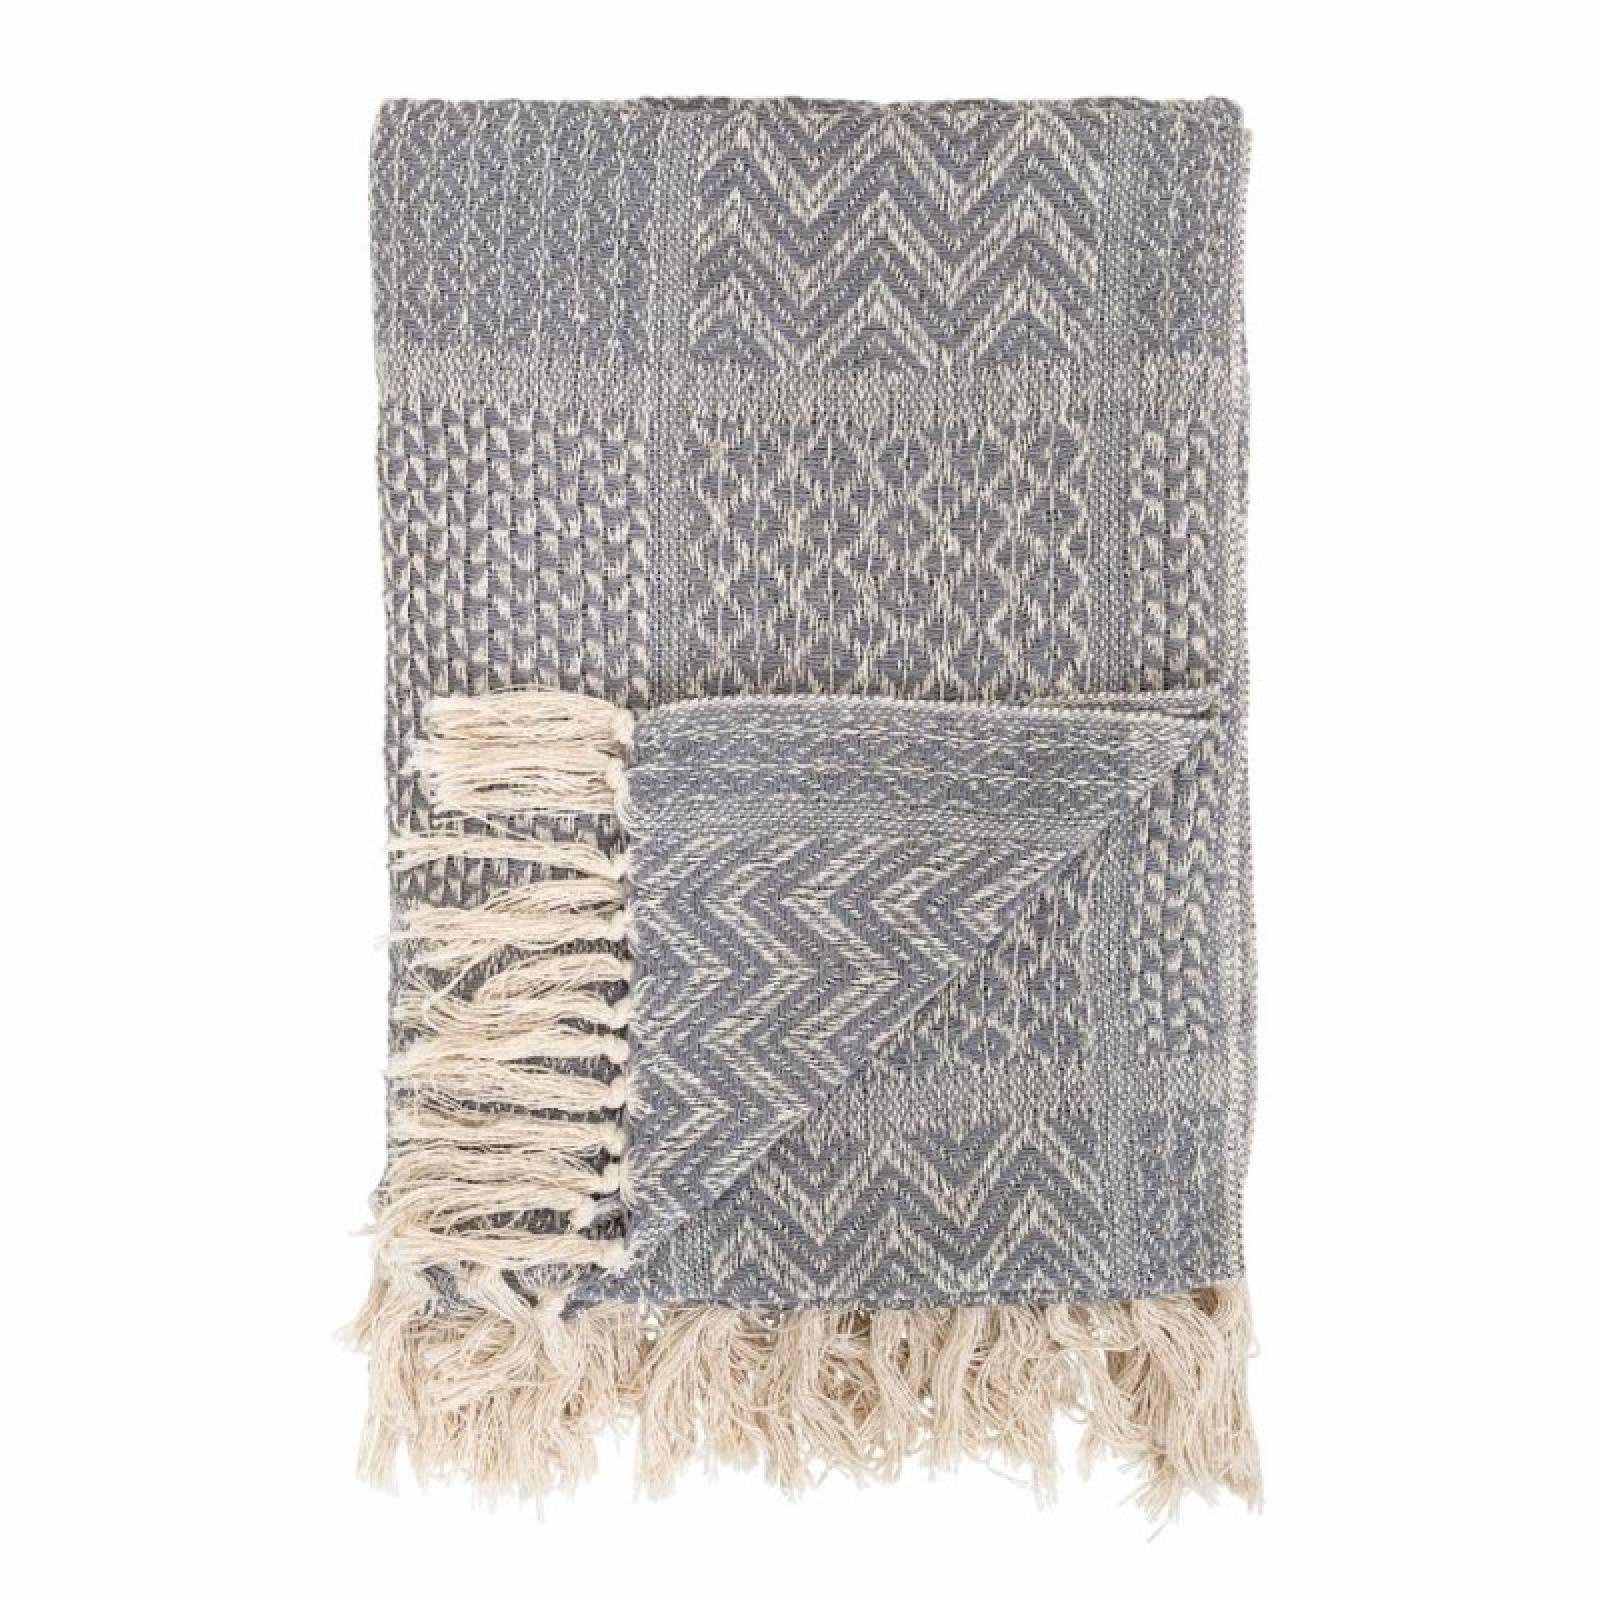 Grey Multi-Patterned Blanket Made From Recycled Cotton thumbnails